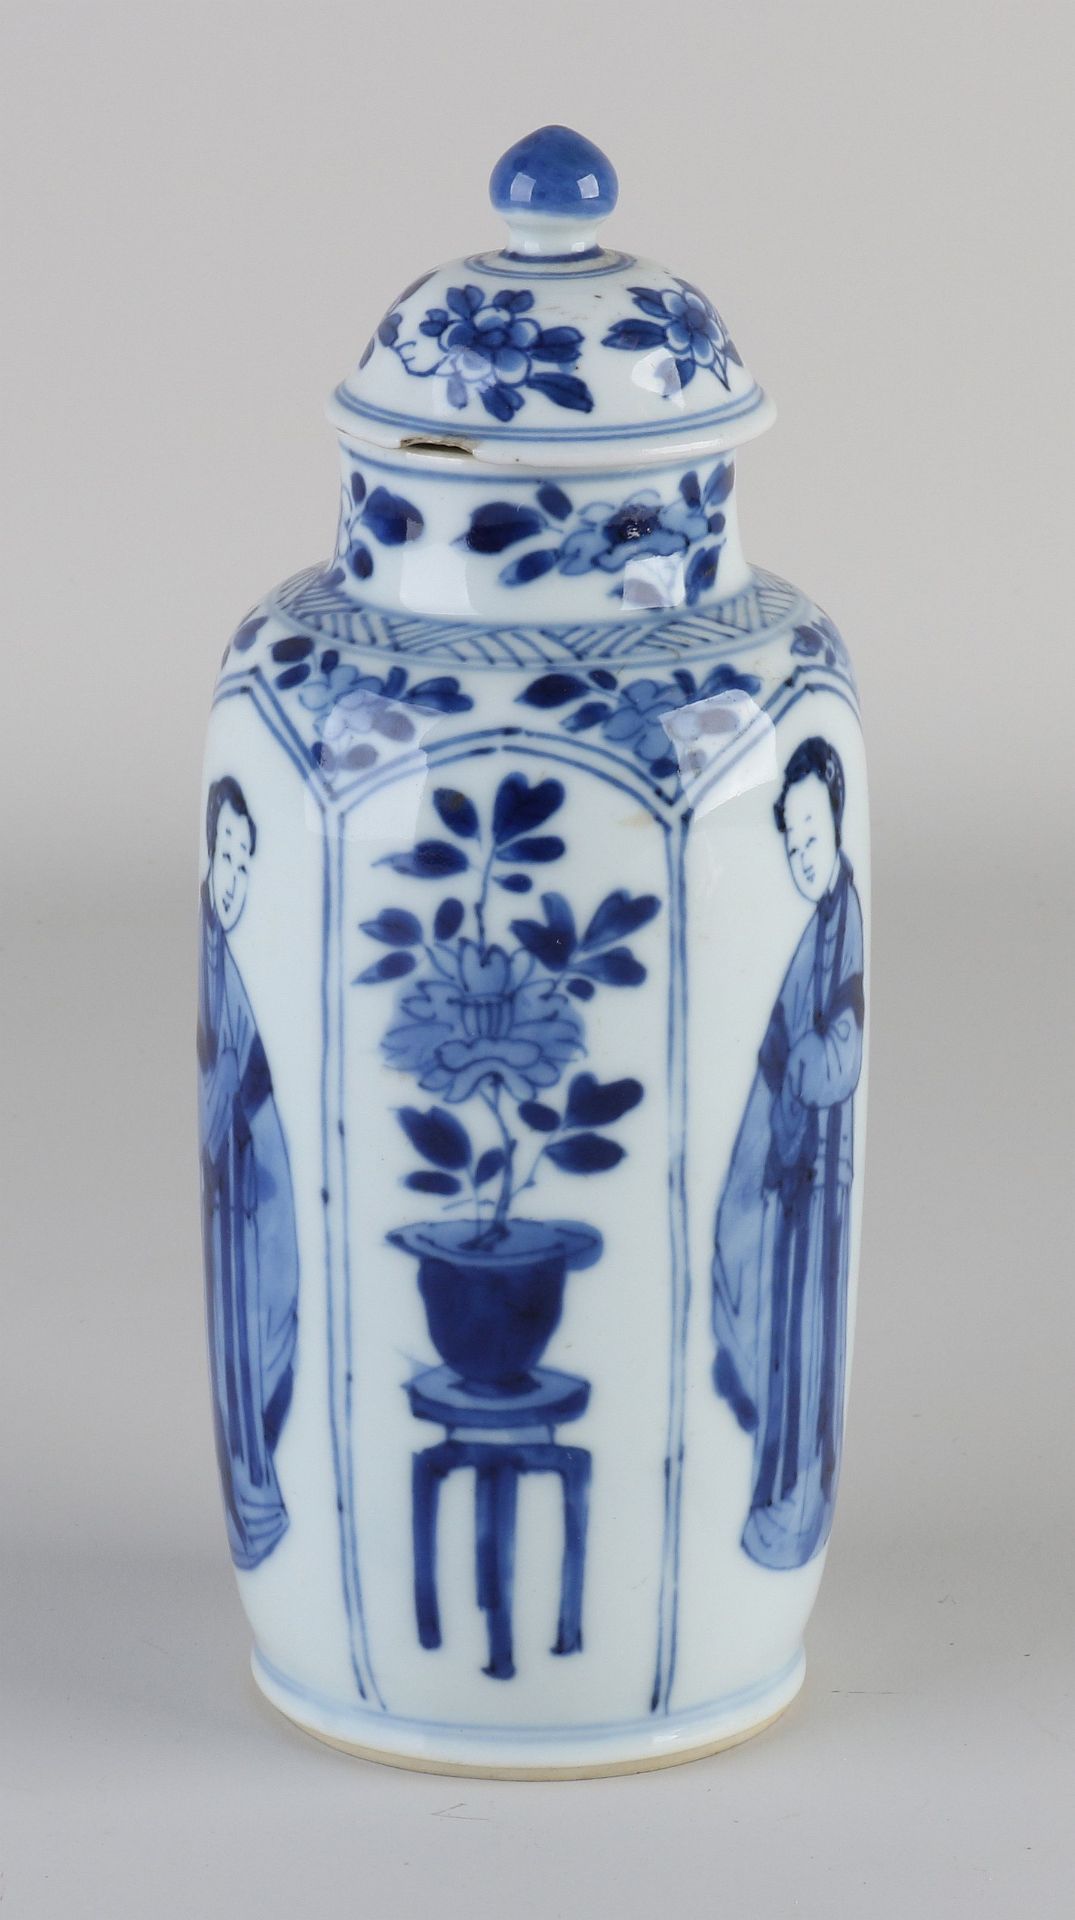 17th - 18th century Kang Xi vase with lid, H 19 cm. - Image 2 of 3